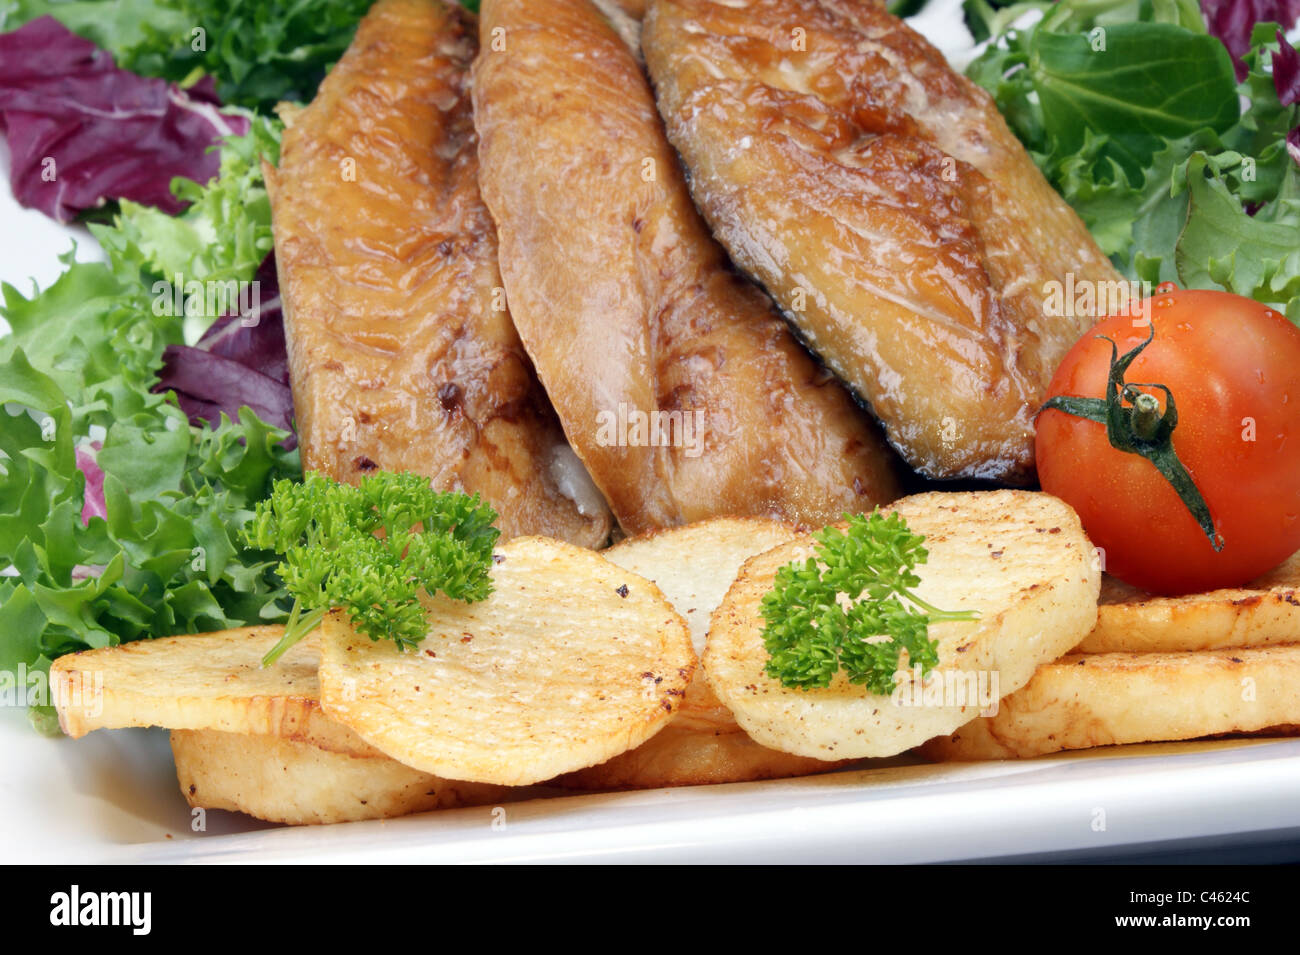 smoked mackerel fillets with fried potatoes and tomato Stock Photo